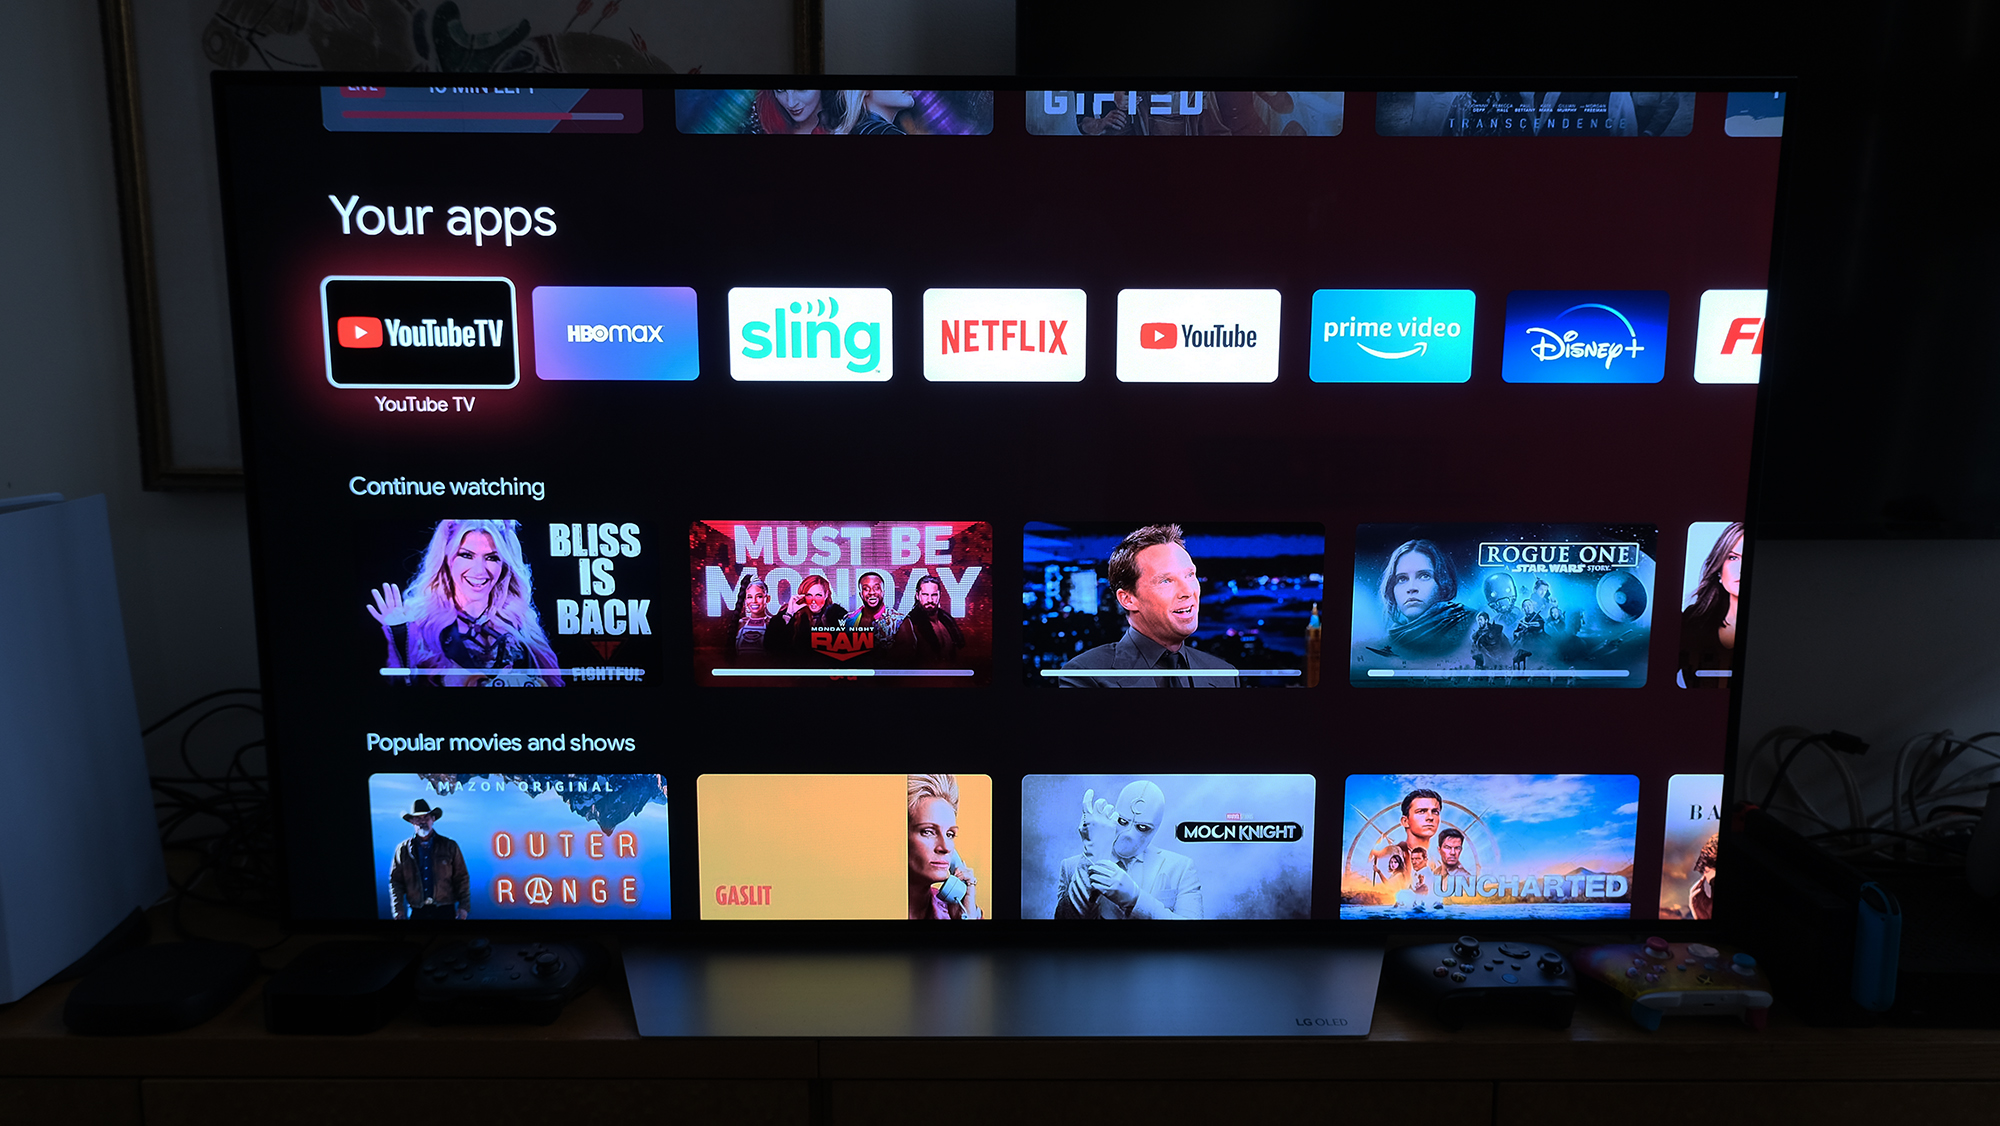 The apps and suggested content rows on the Chromecast with Google TV's home screen